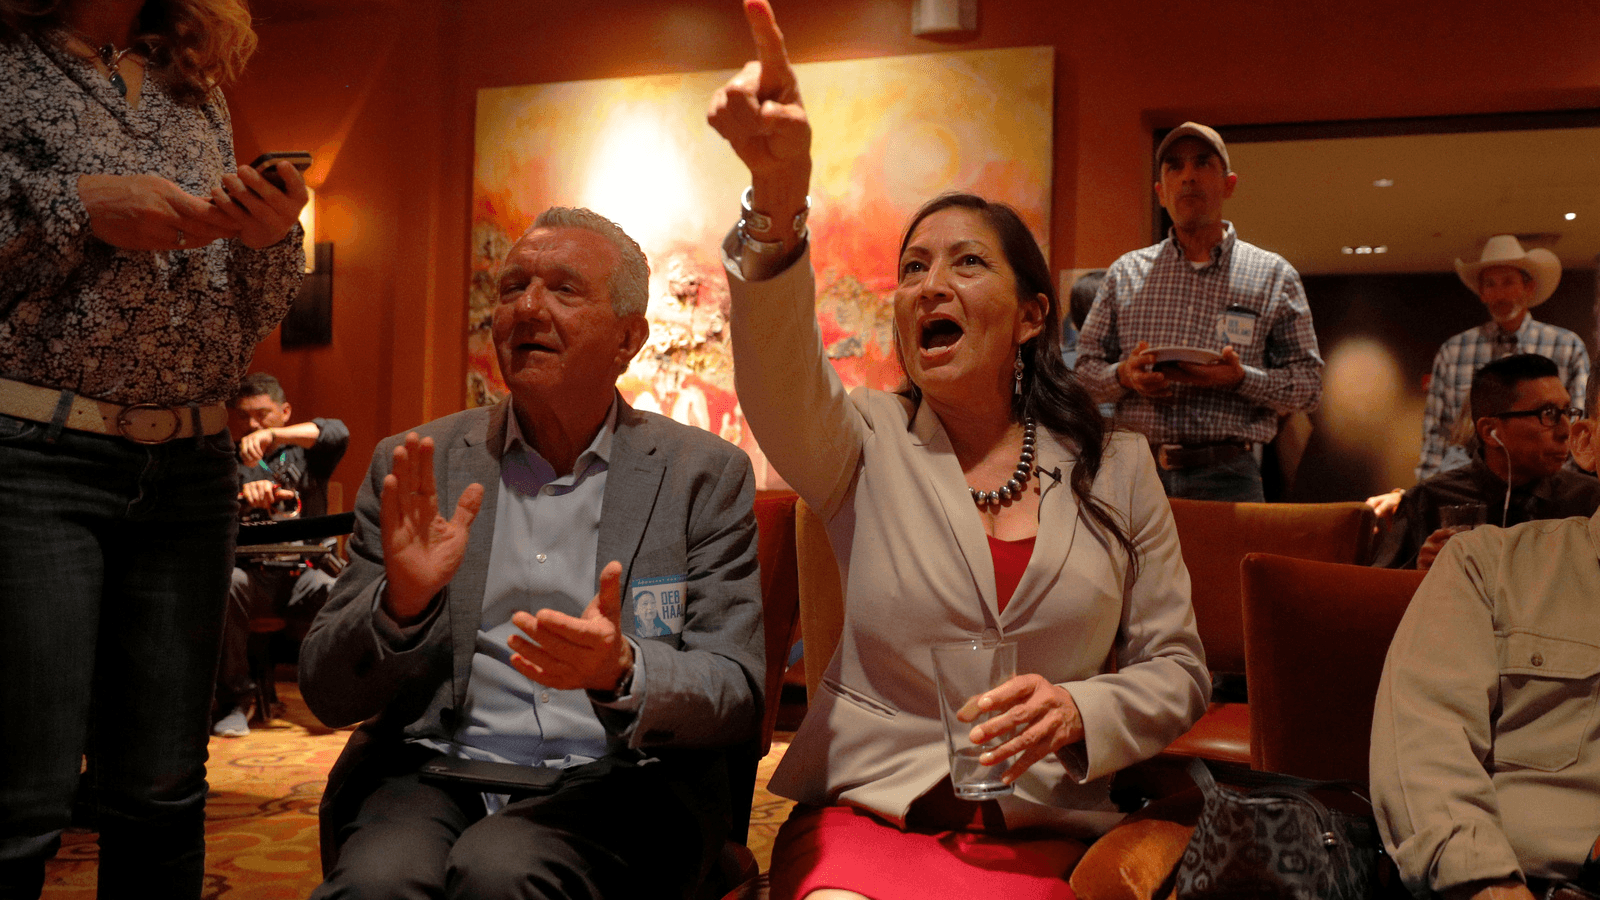 Democratic congressional candidate Deb Haaland reacts upon learning that fellow Native American Sharice Davids of Kansas also won her midterm election